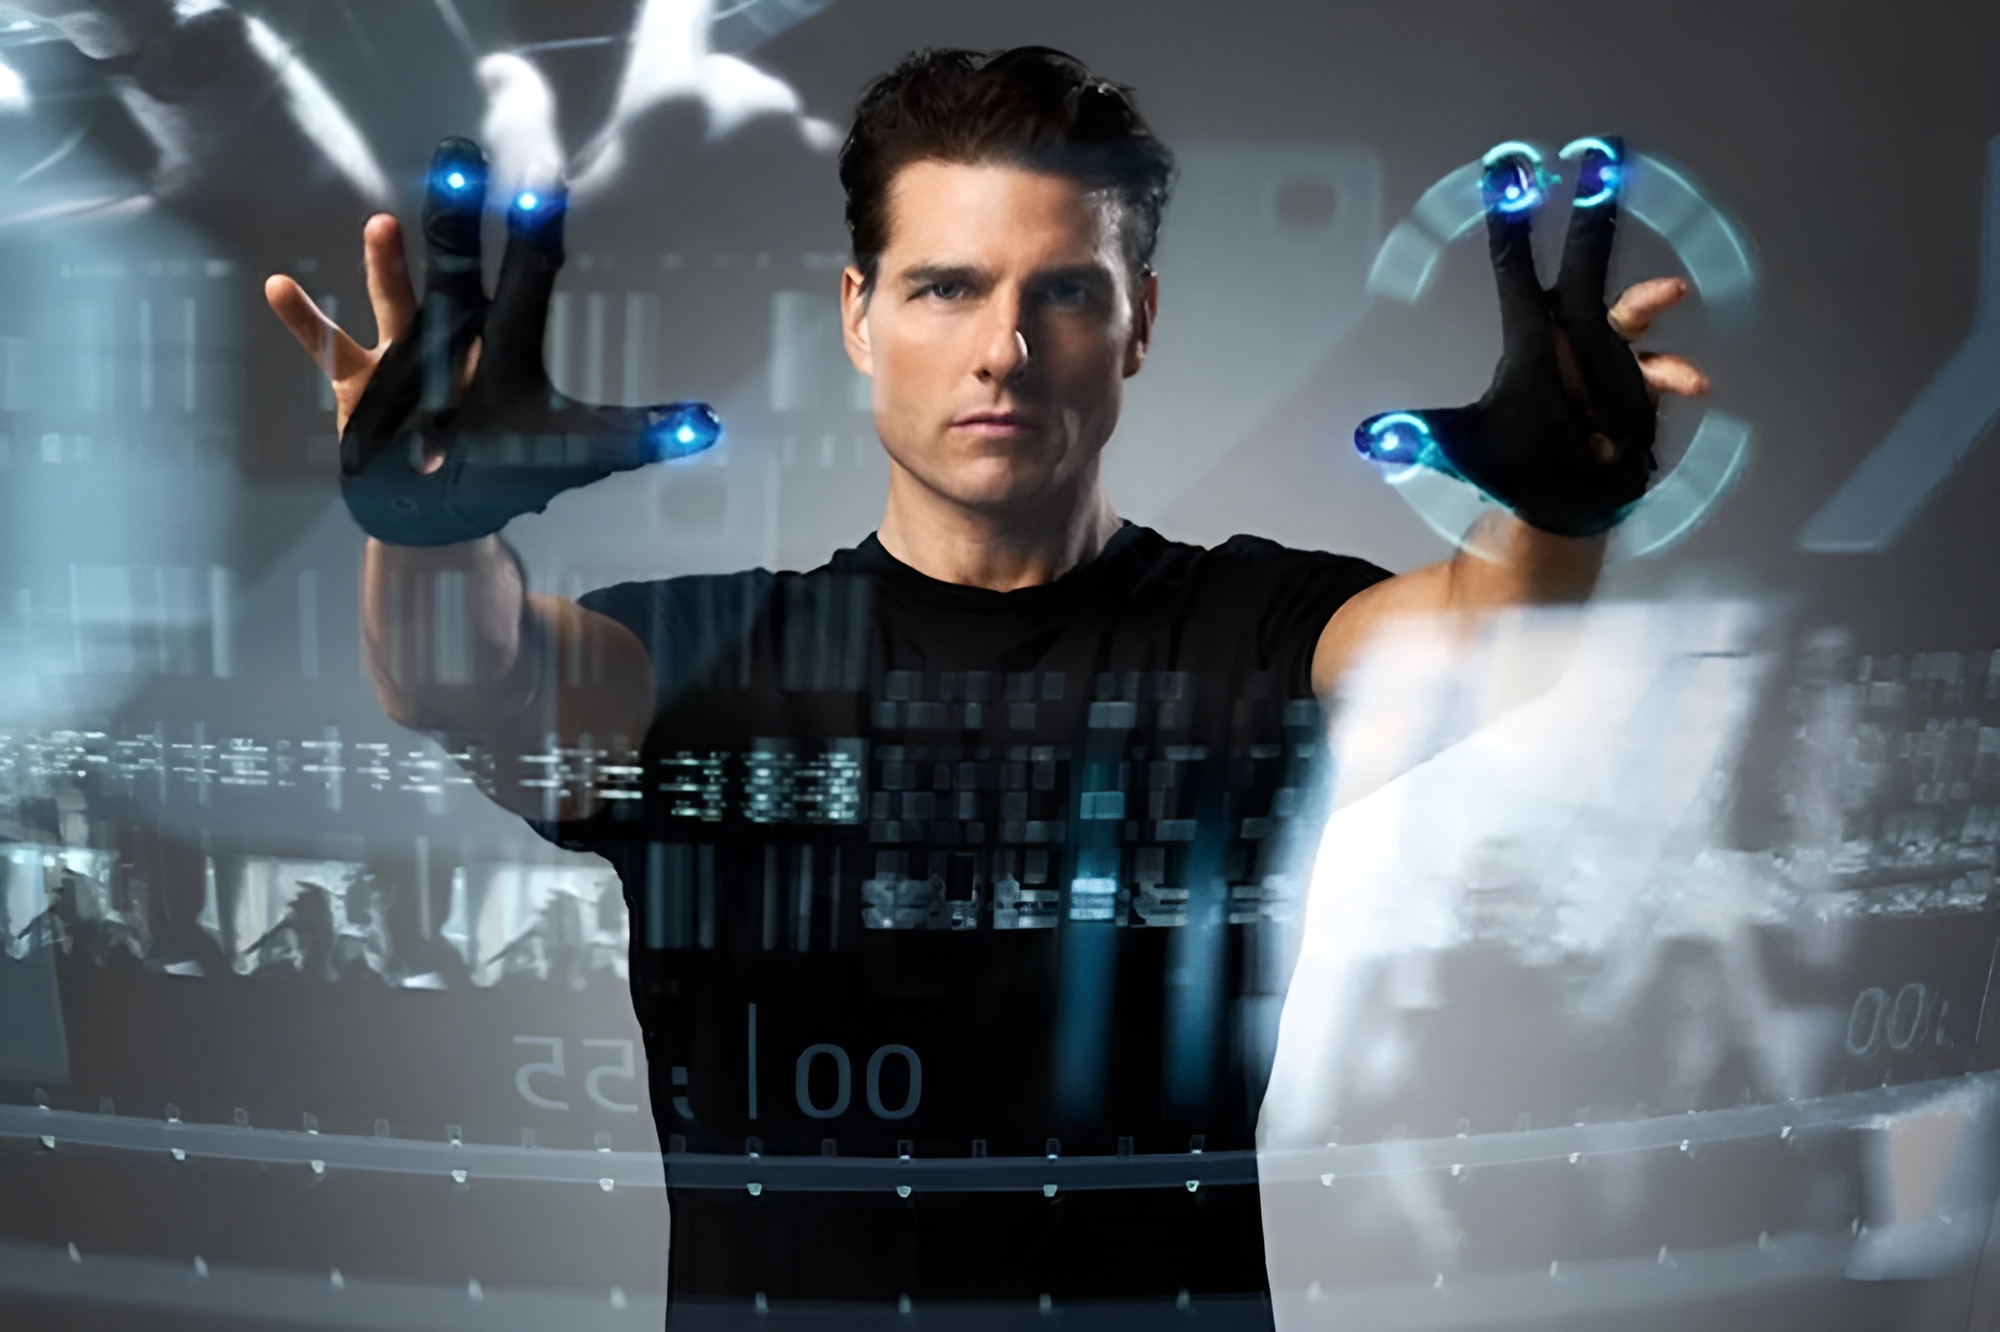 Minority Report showed a futuristic AR compuer interface